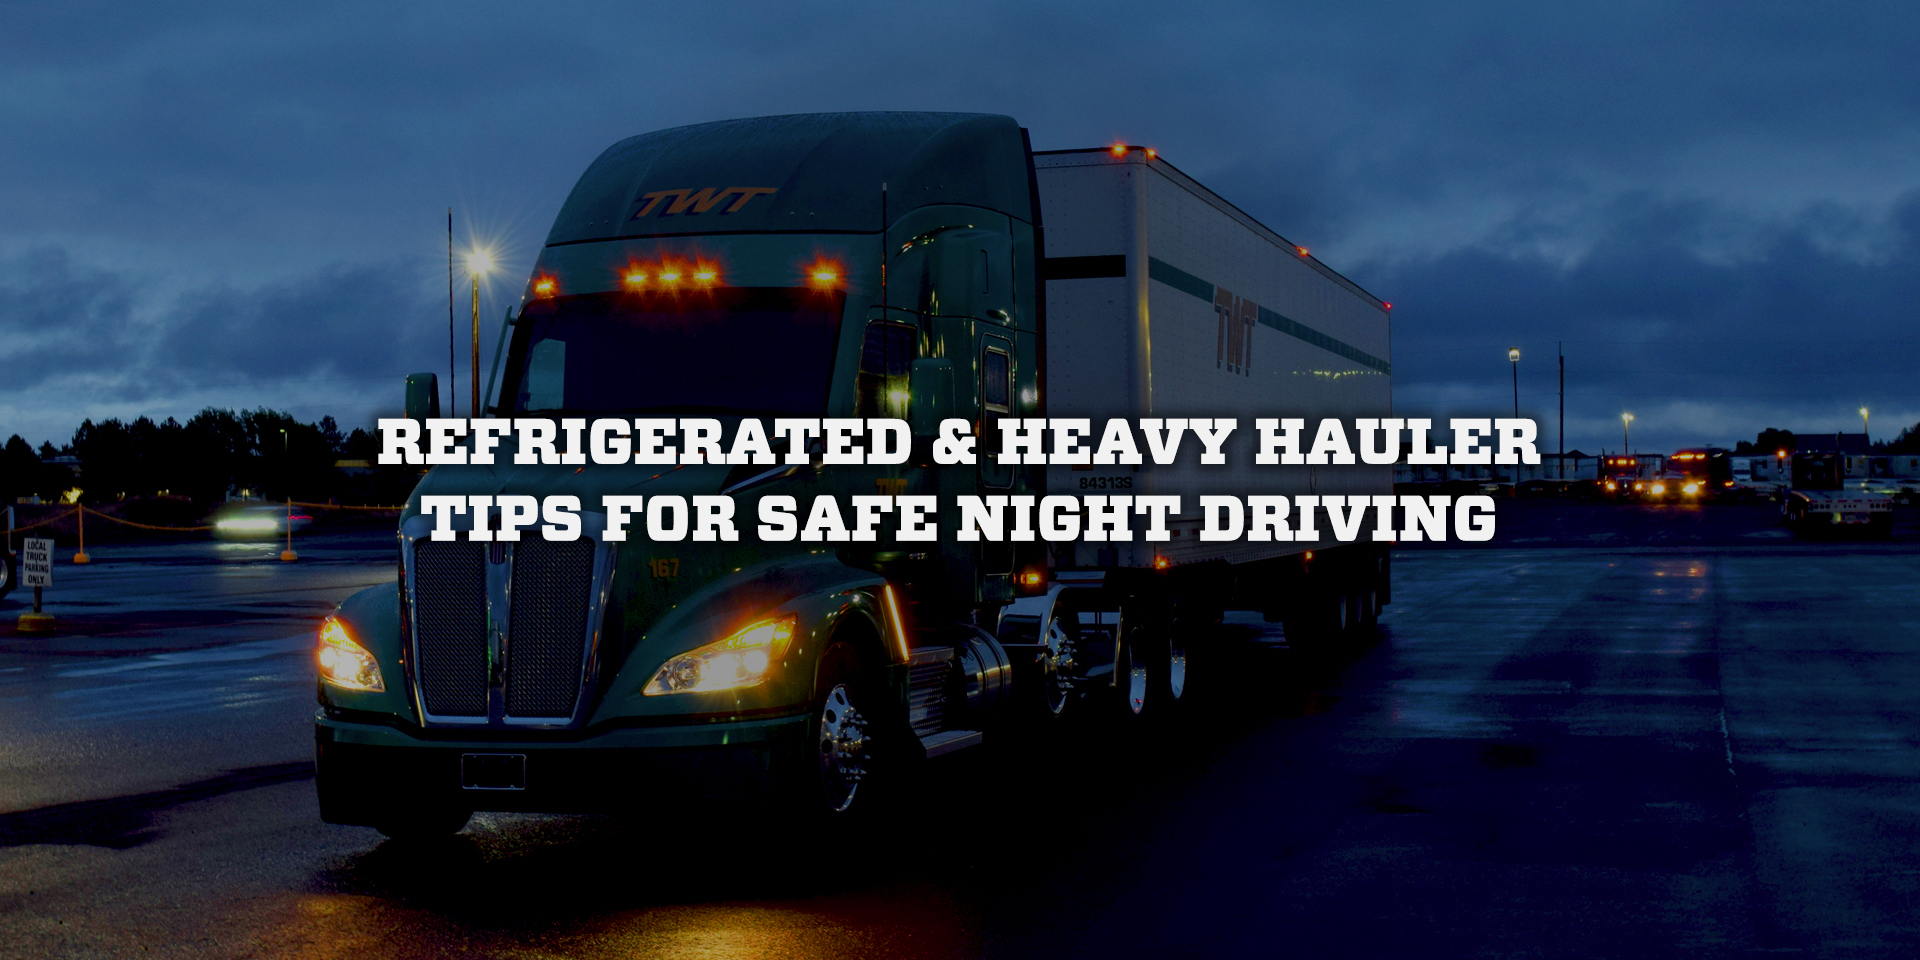 Refrigerated & Heavy Hauler Tips for Safe Night Driving - TW Transport